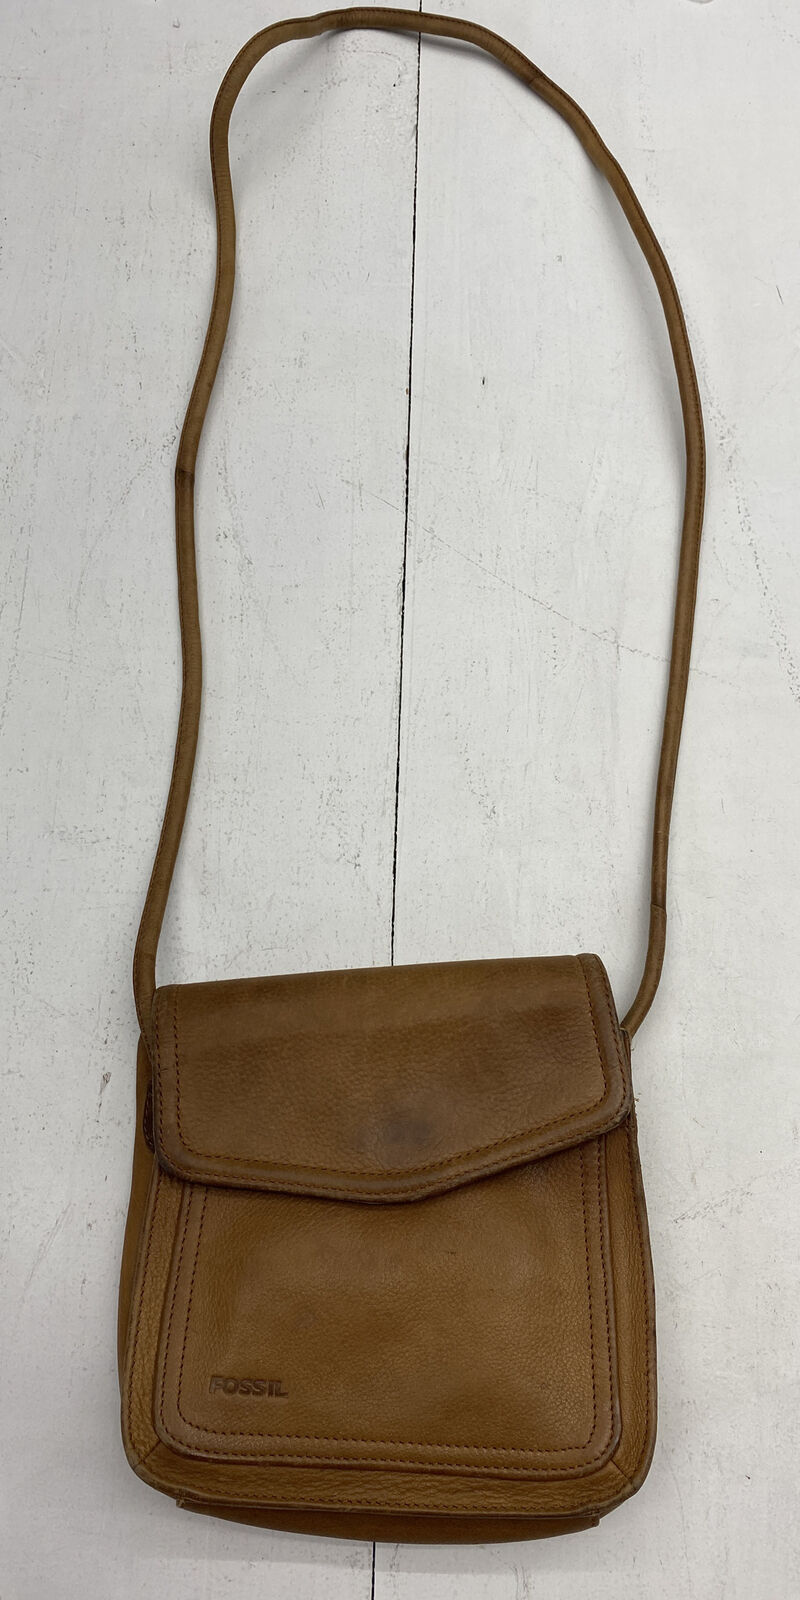 Small Vintage Coach bag. Pre-owned and in great condition